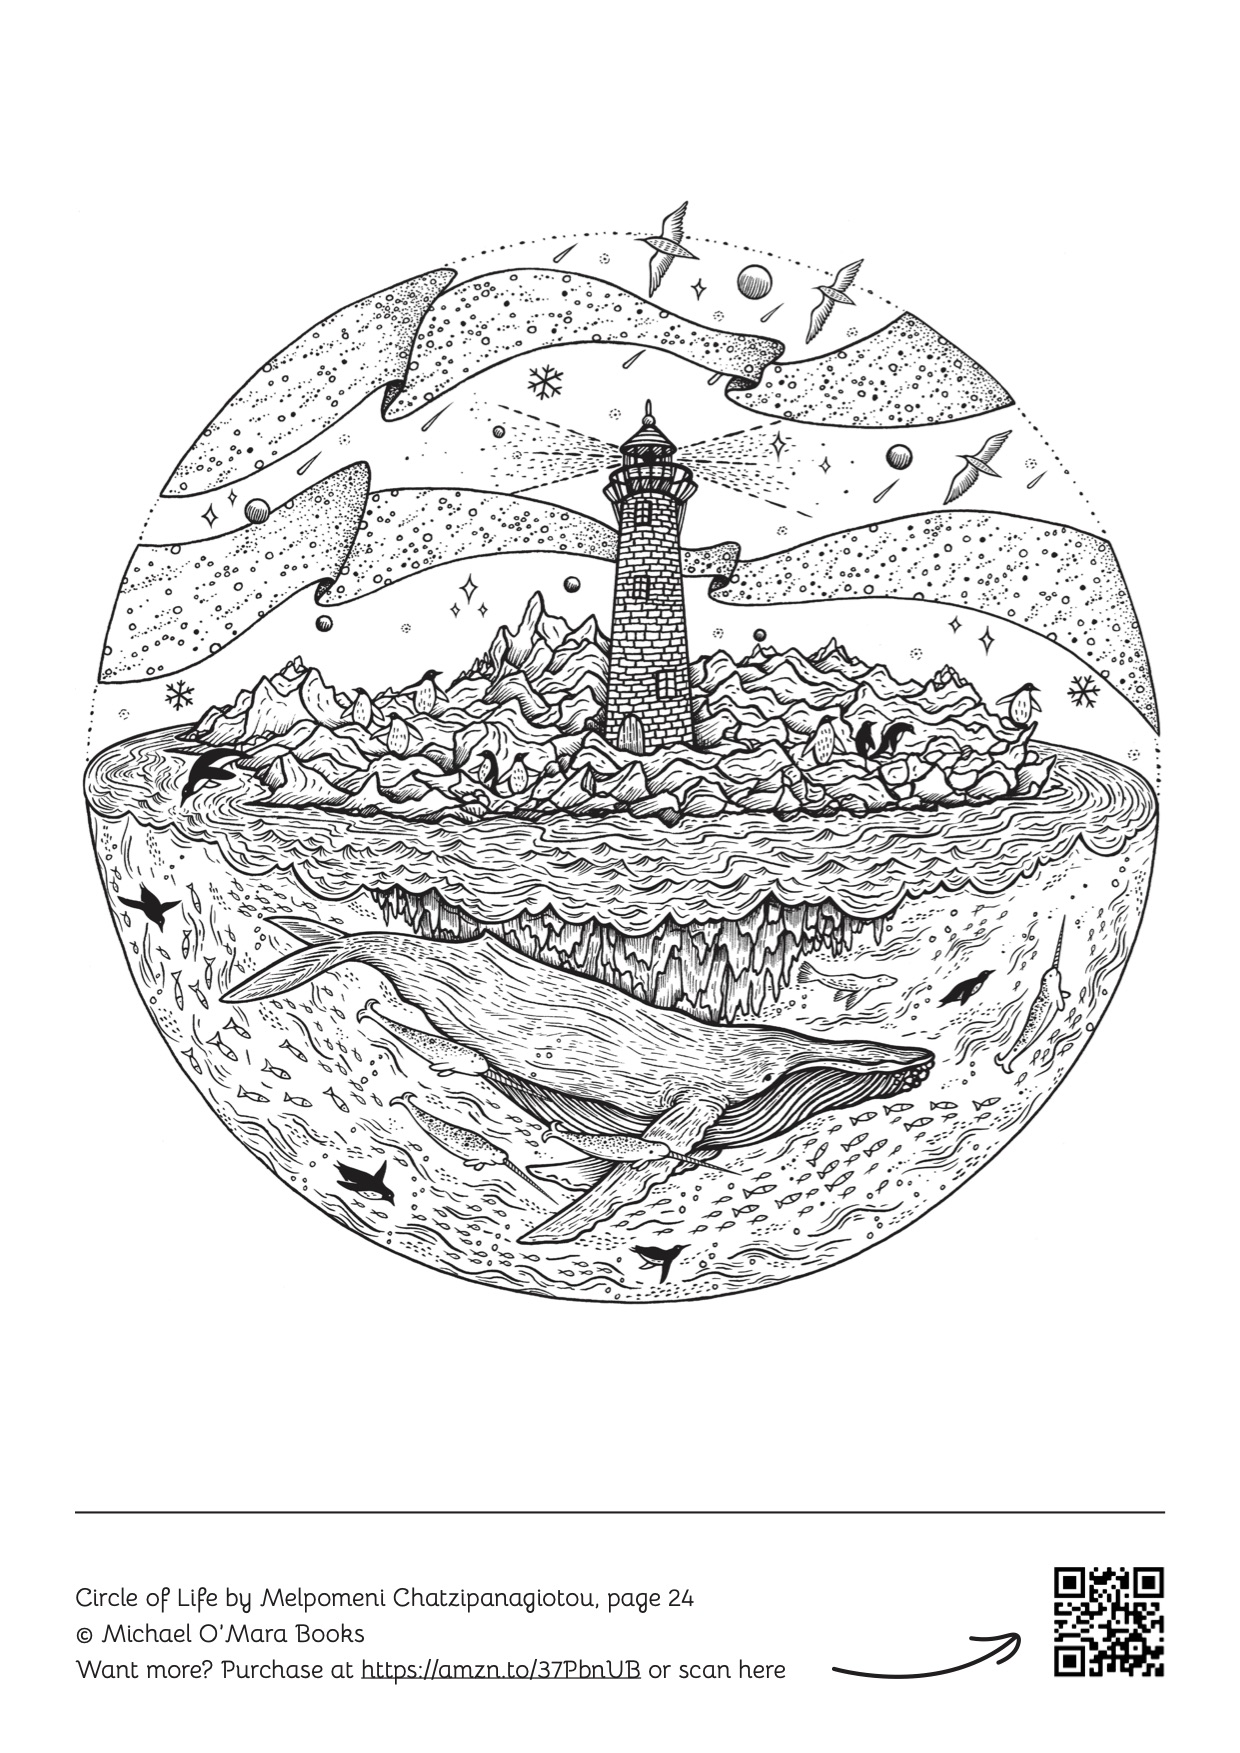 Download Free Downloadable Colouring Pages for Adults - Michael O'Mara Books